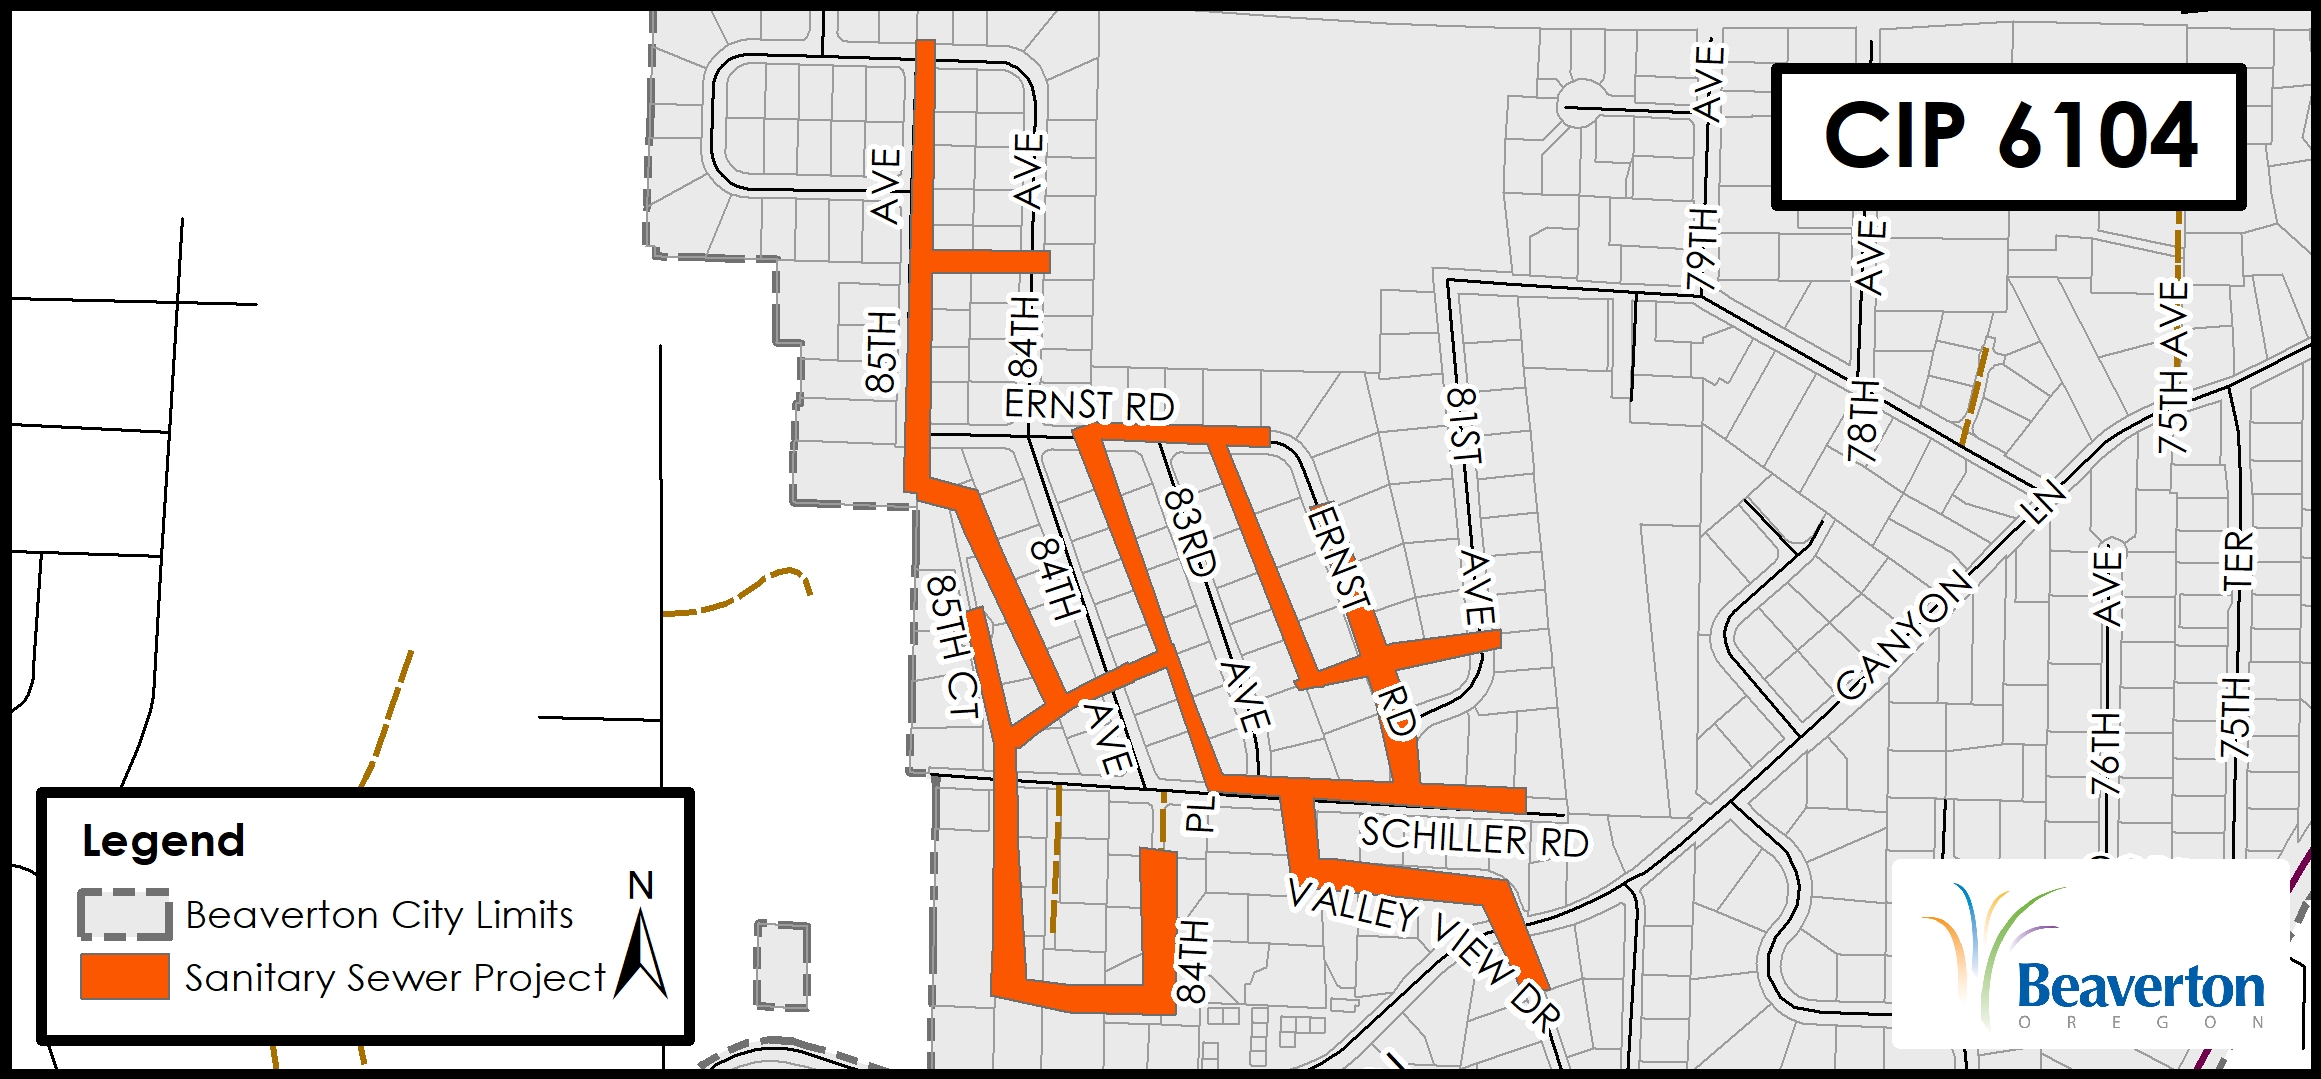 Sanitary Sewer CIP 6104 map for SW 85th Avenue, SW 85th Court, SW 84th Place, SW Ernst Road, SW Schiller Road and Valley View Drive.